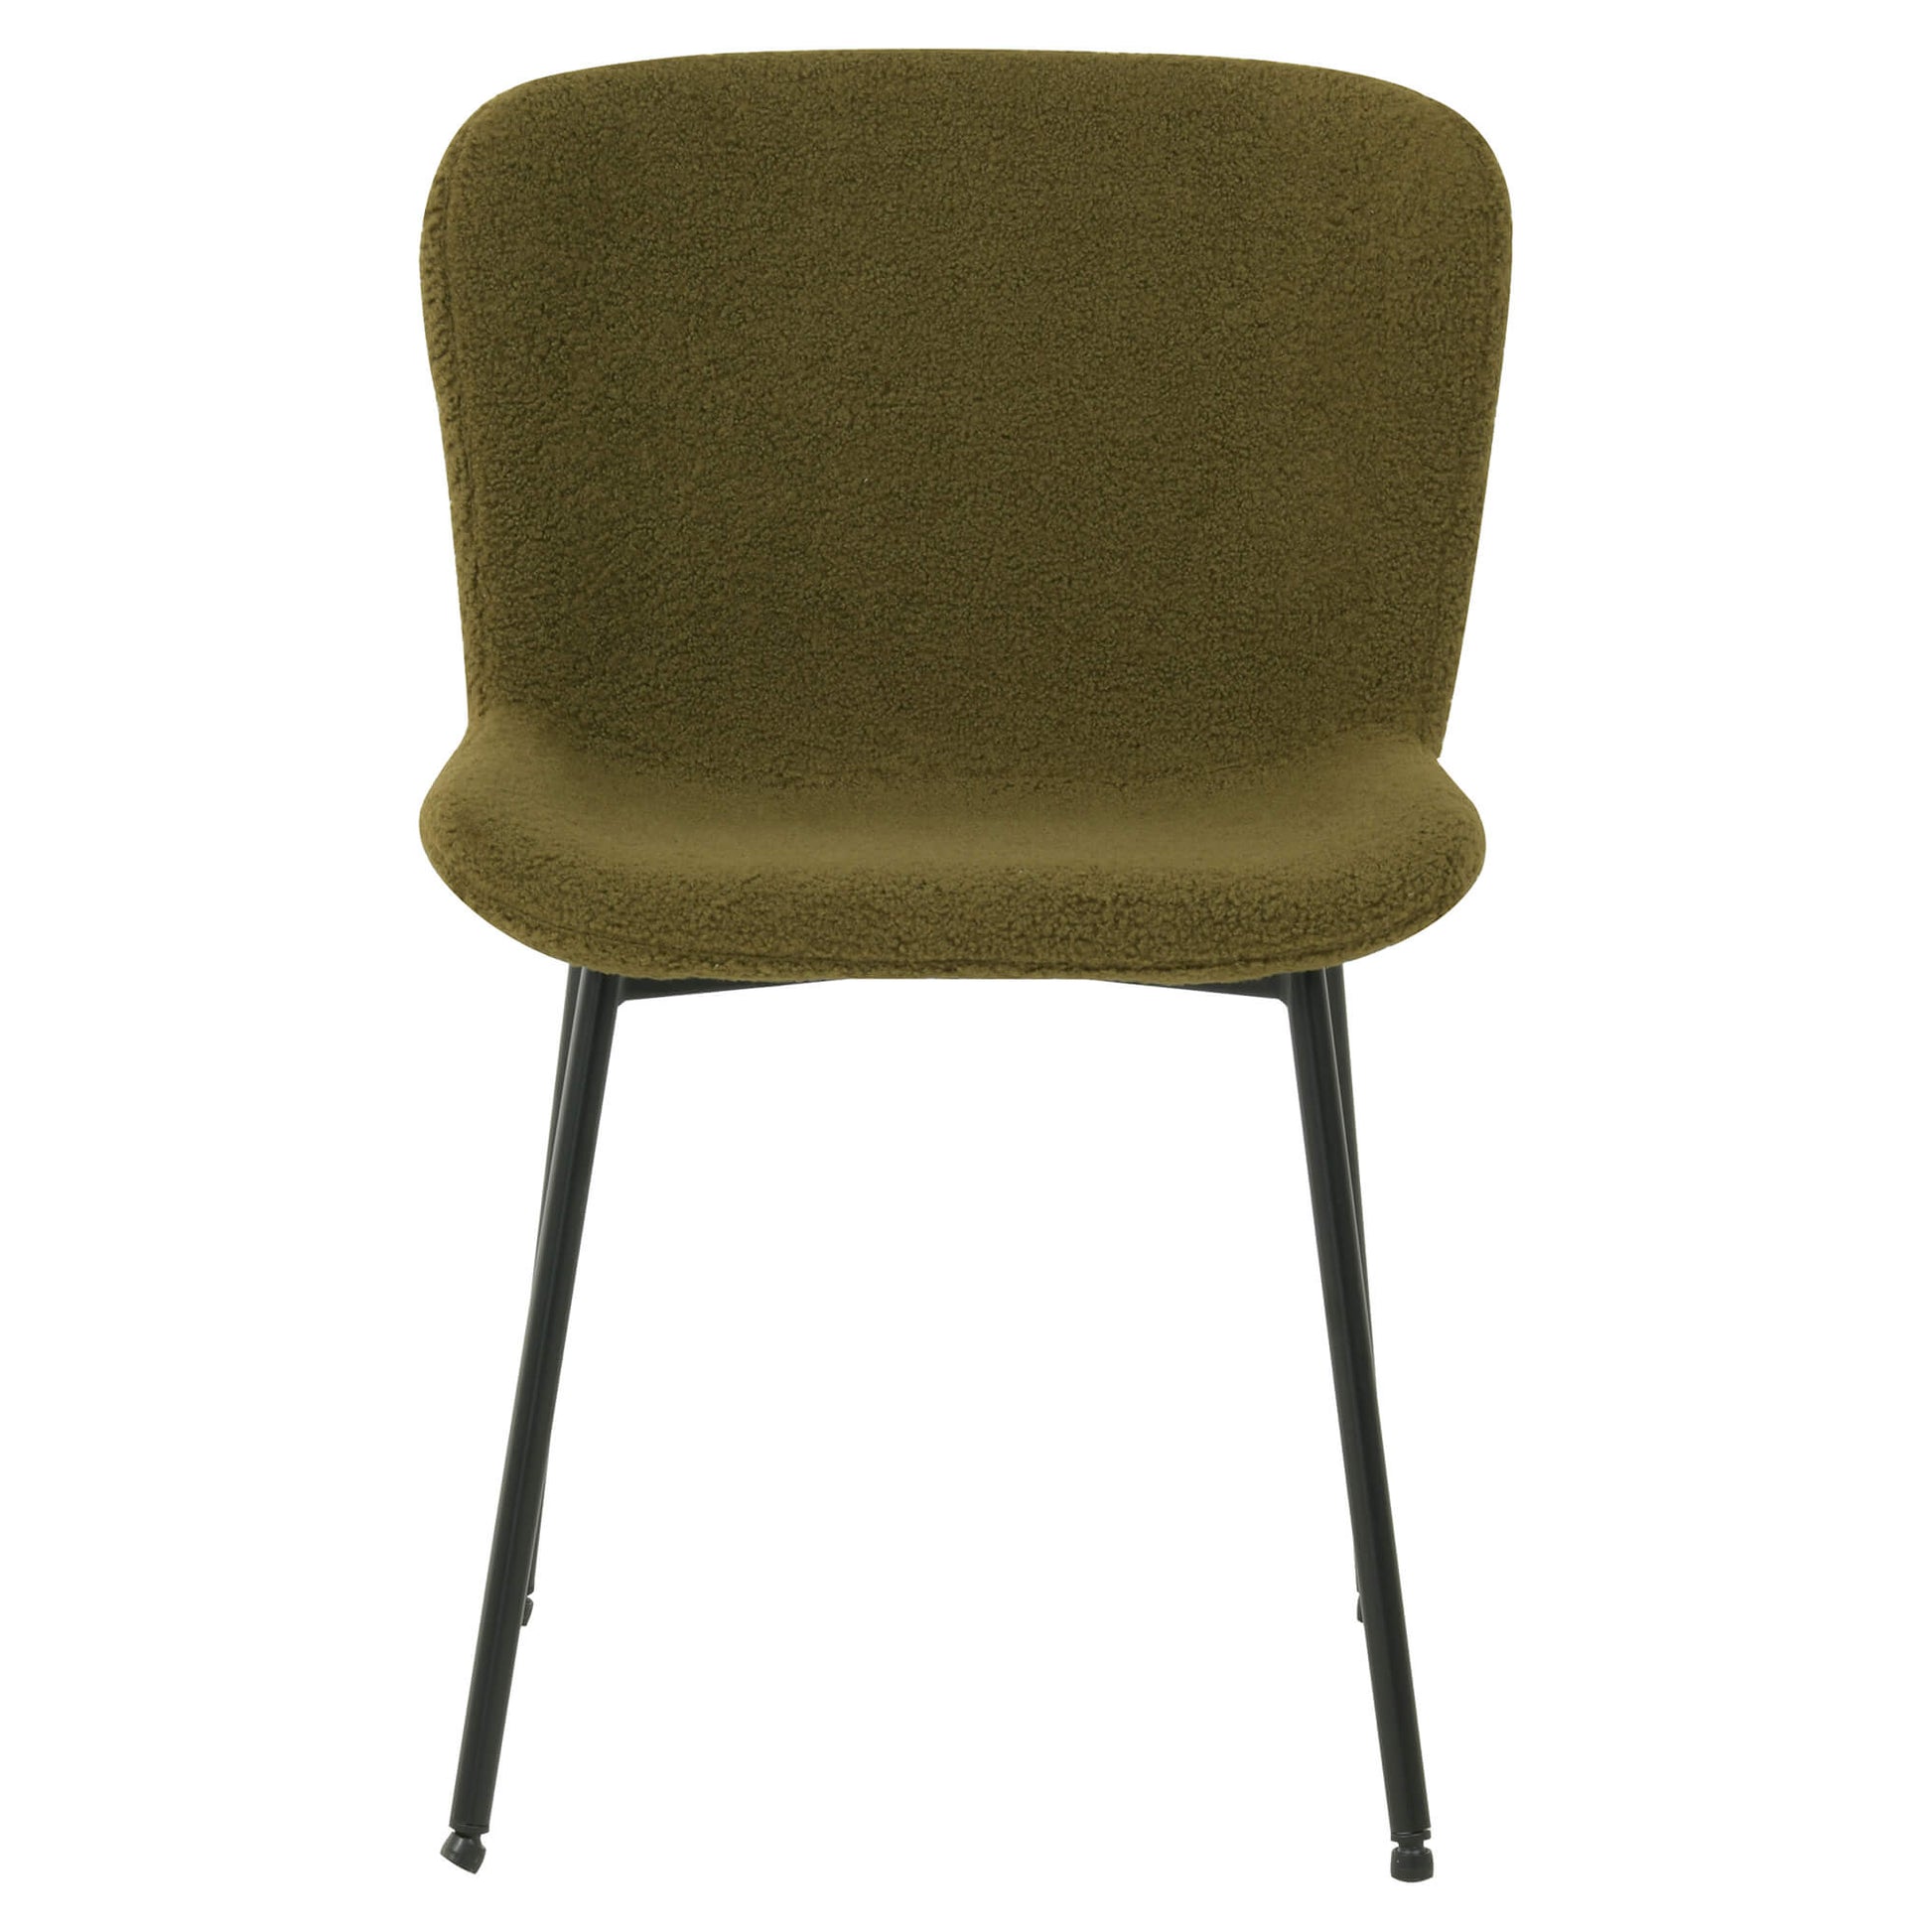 Amira | Modern Metal Fabric Dining Chairs | Set Of 4 | Olive Green